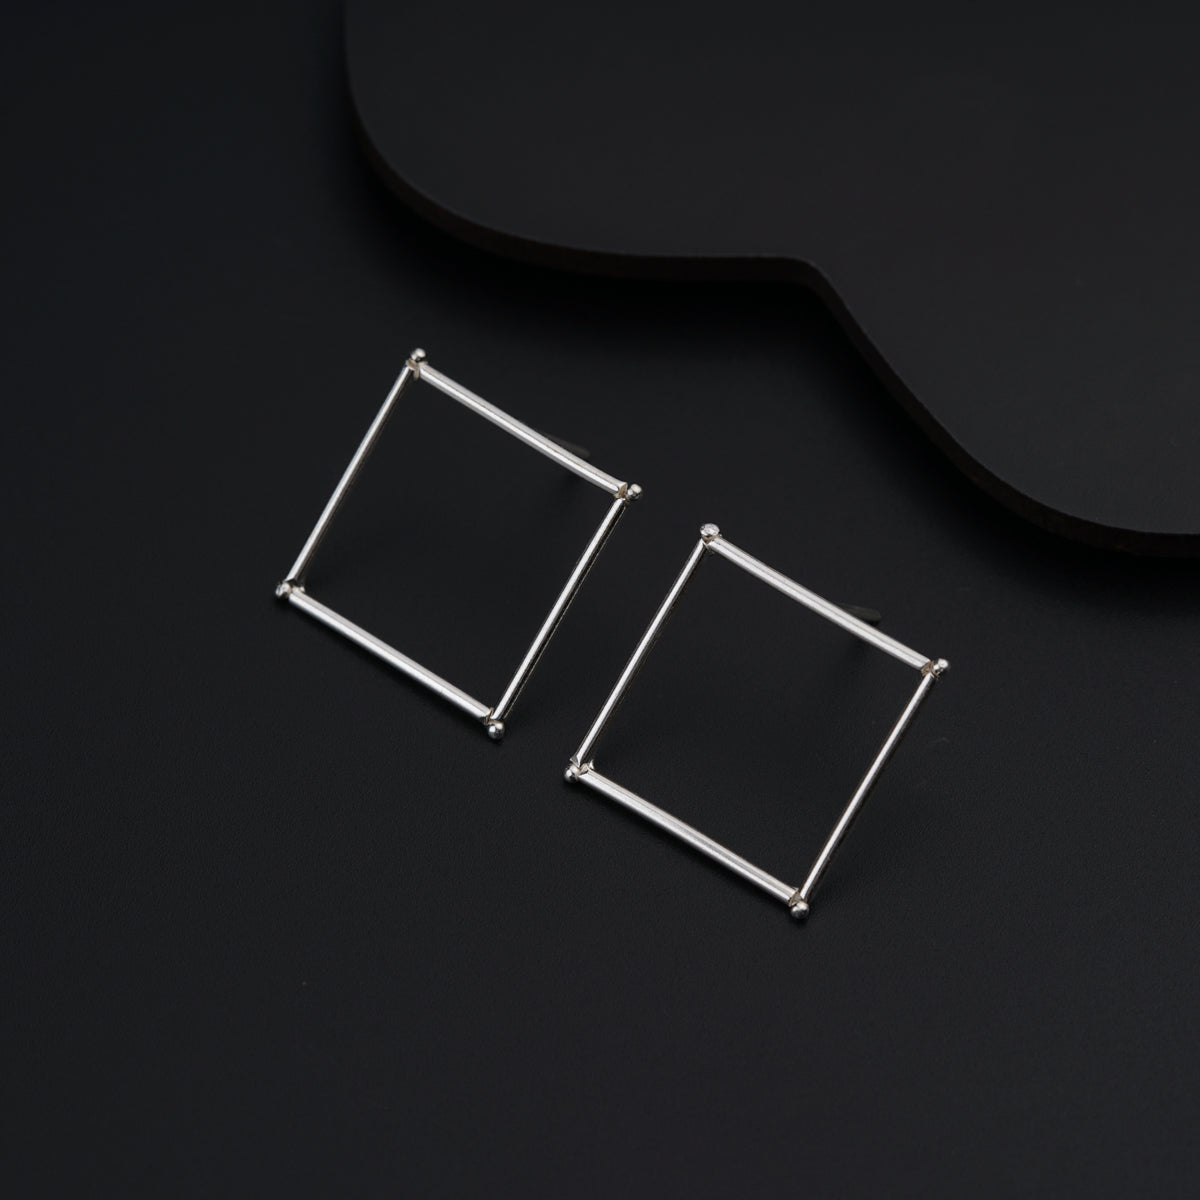 a pair of square earrings sitting on top of a black surface